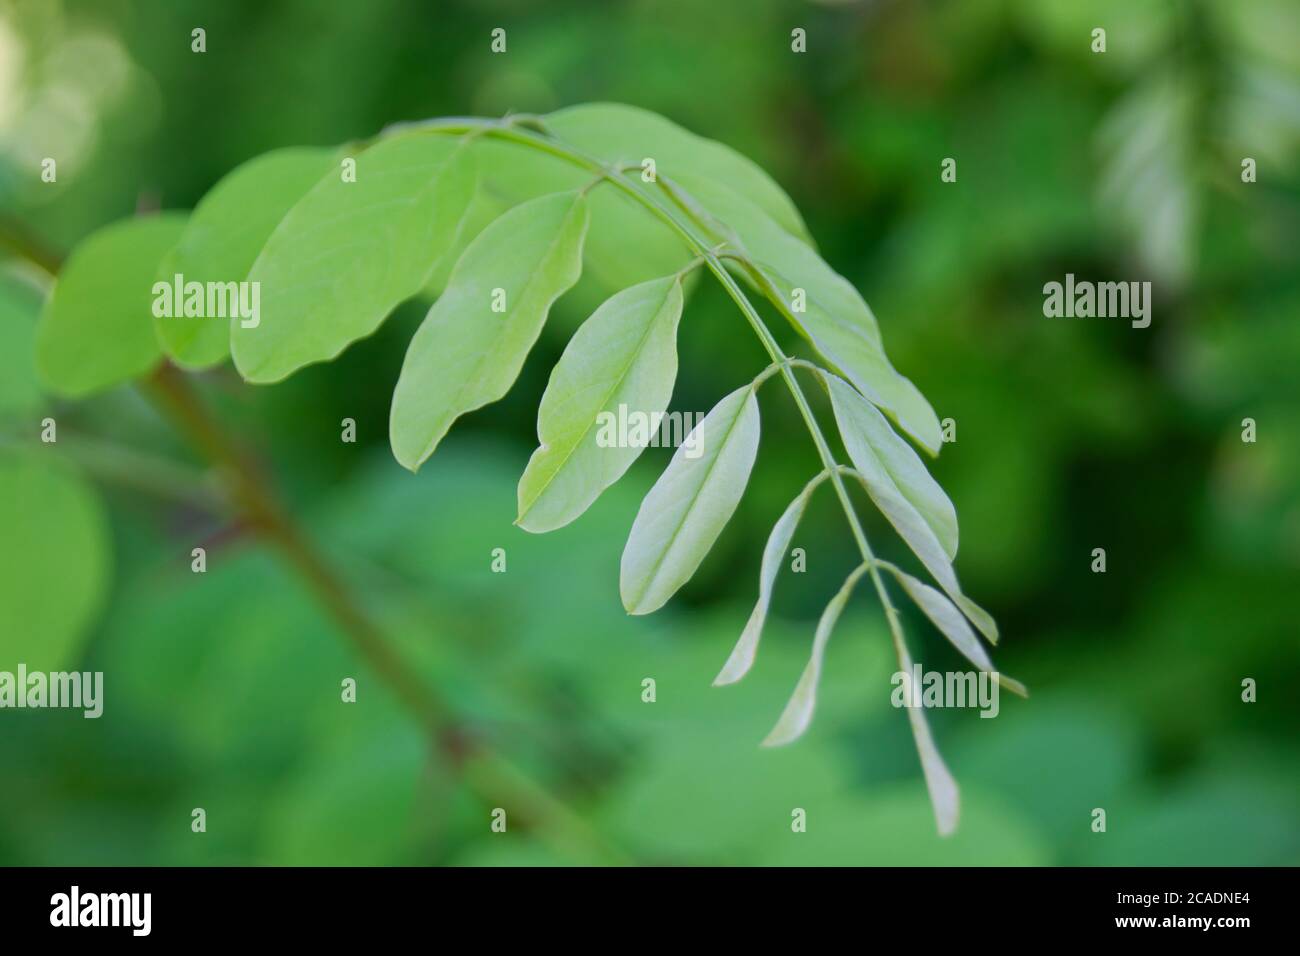 leaves of a robinia plant with thorns Stock Photo